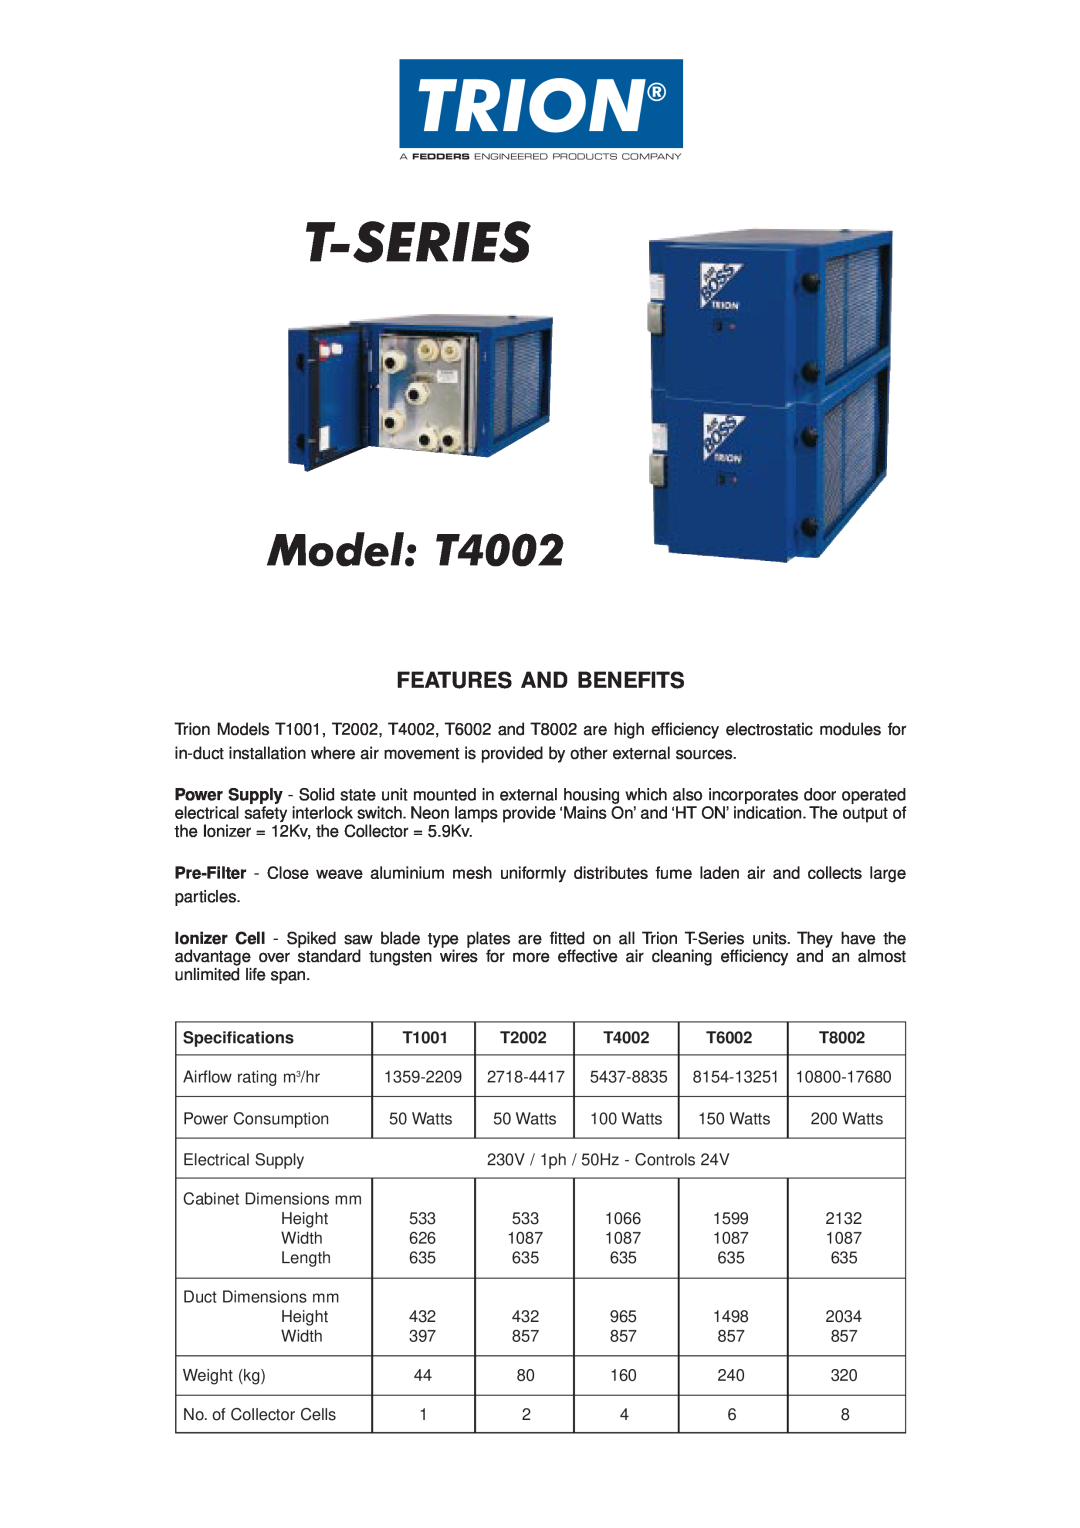 Trion T6002, T1001, T8002, T2002 specifications Model T4002, Trion, T-Series, Features And Benefits 